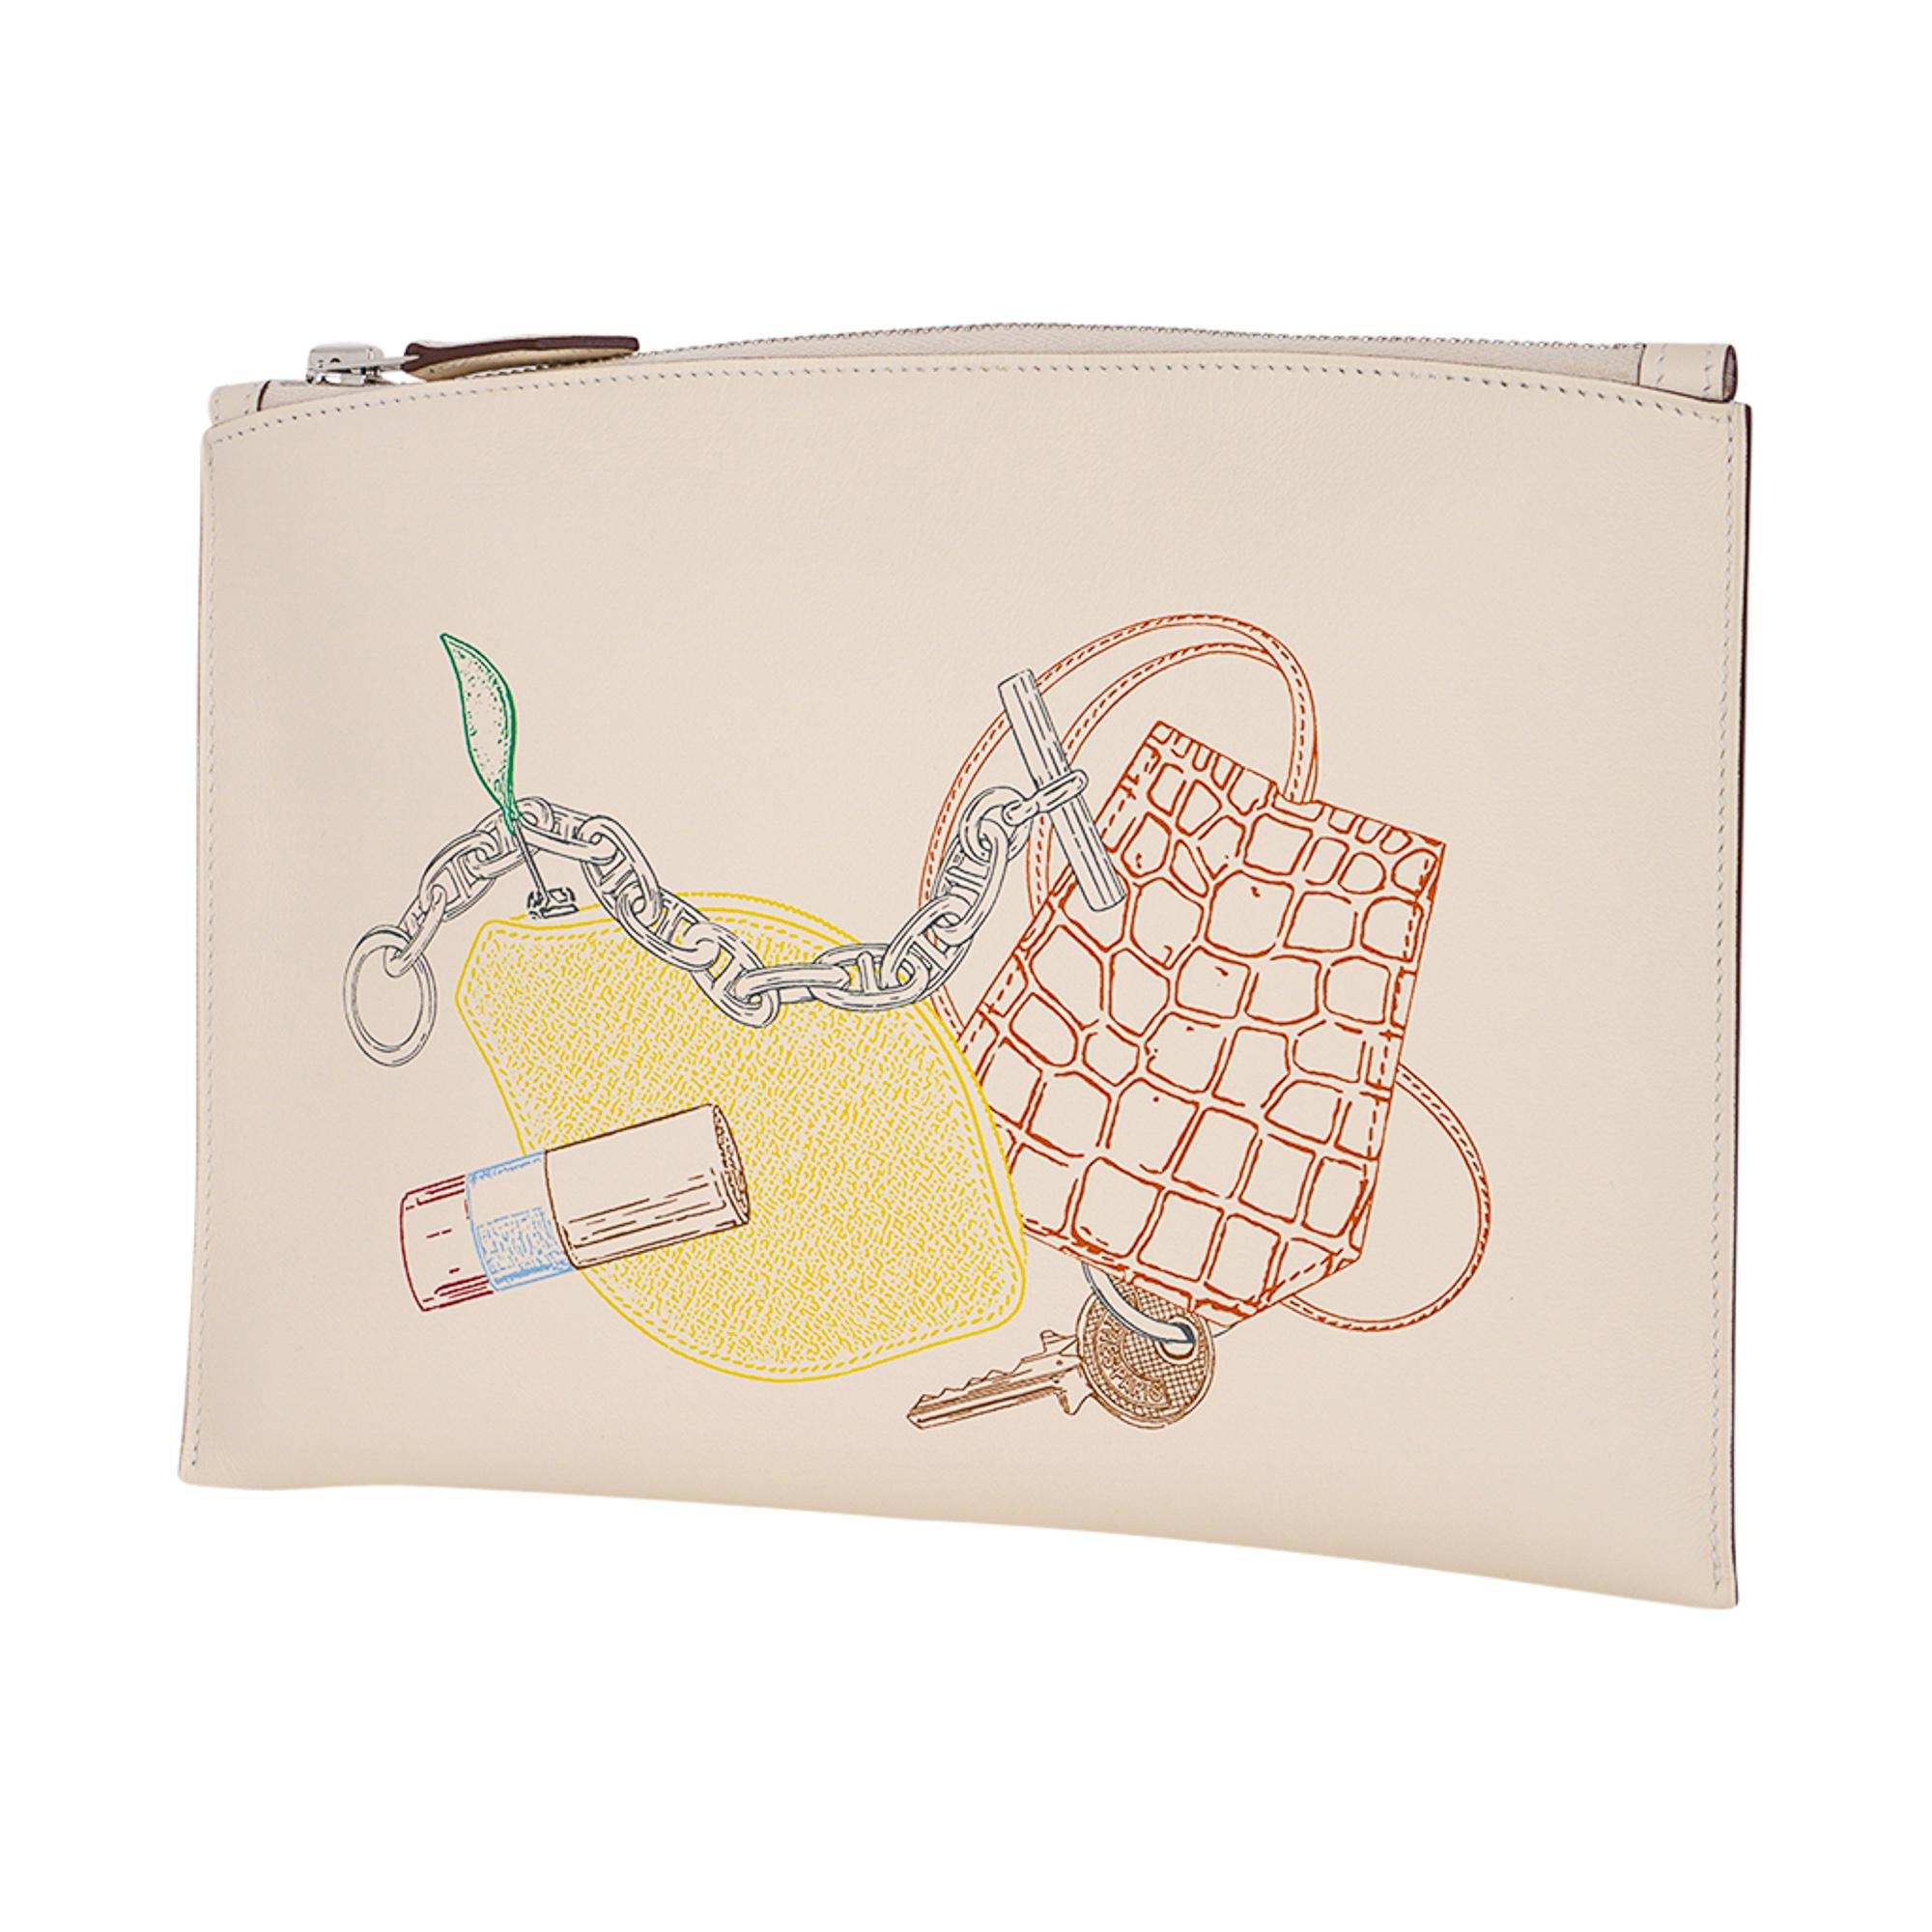 hermes pouch bag